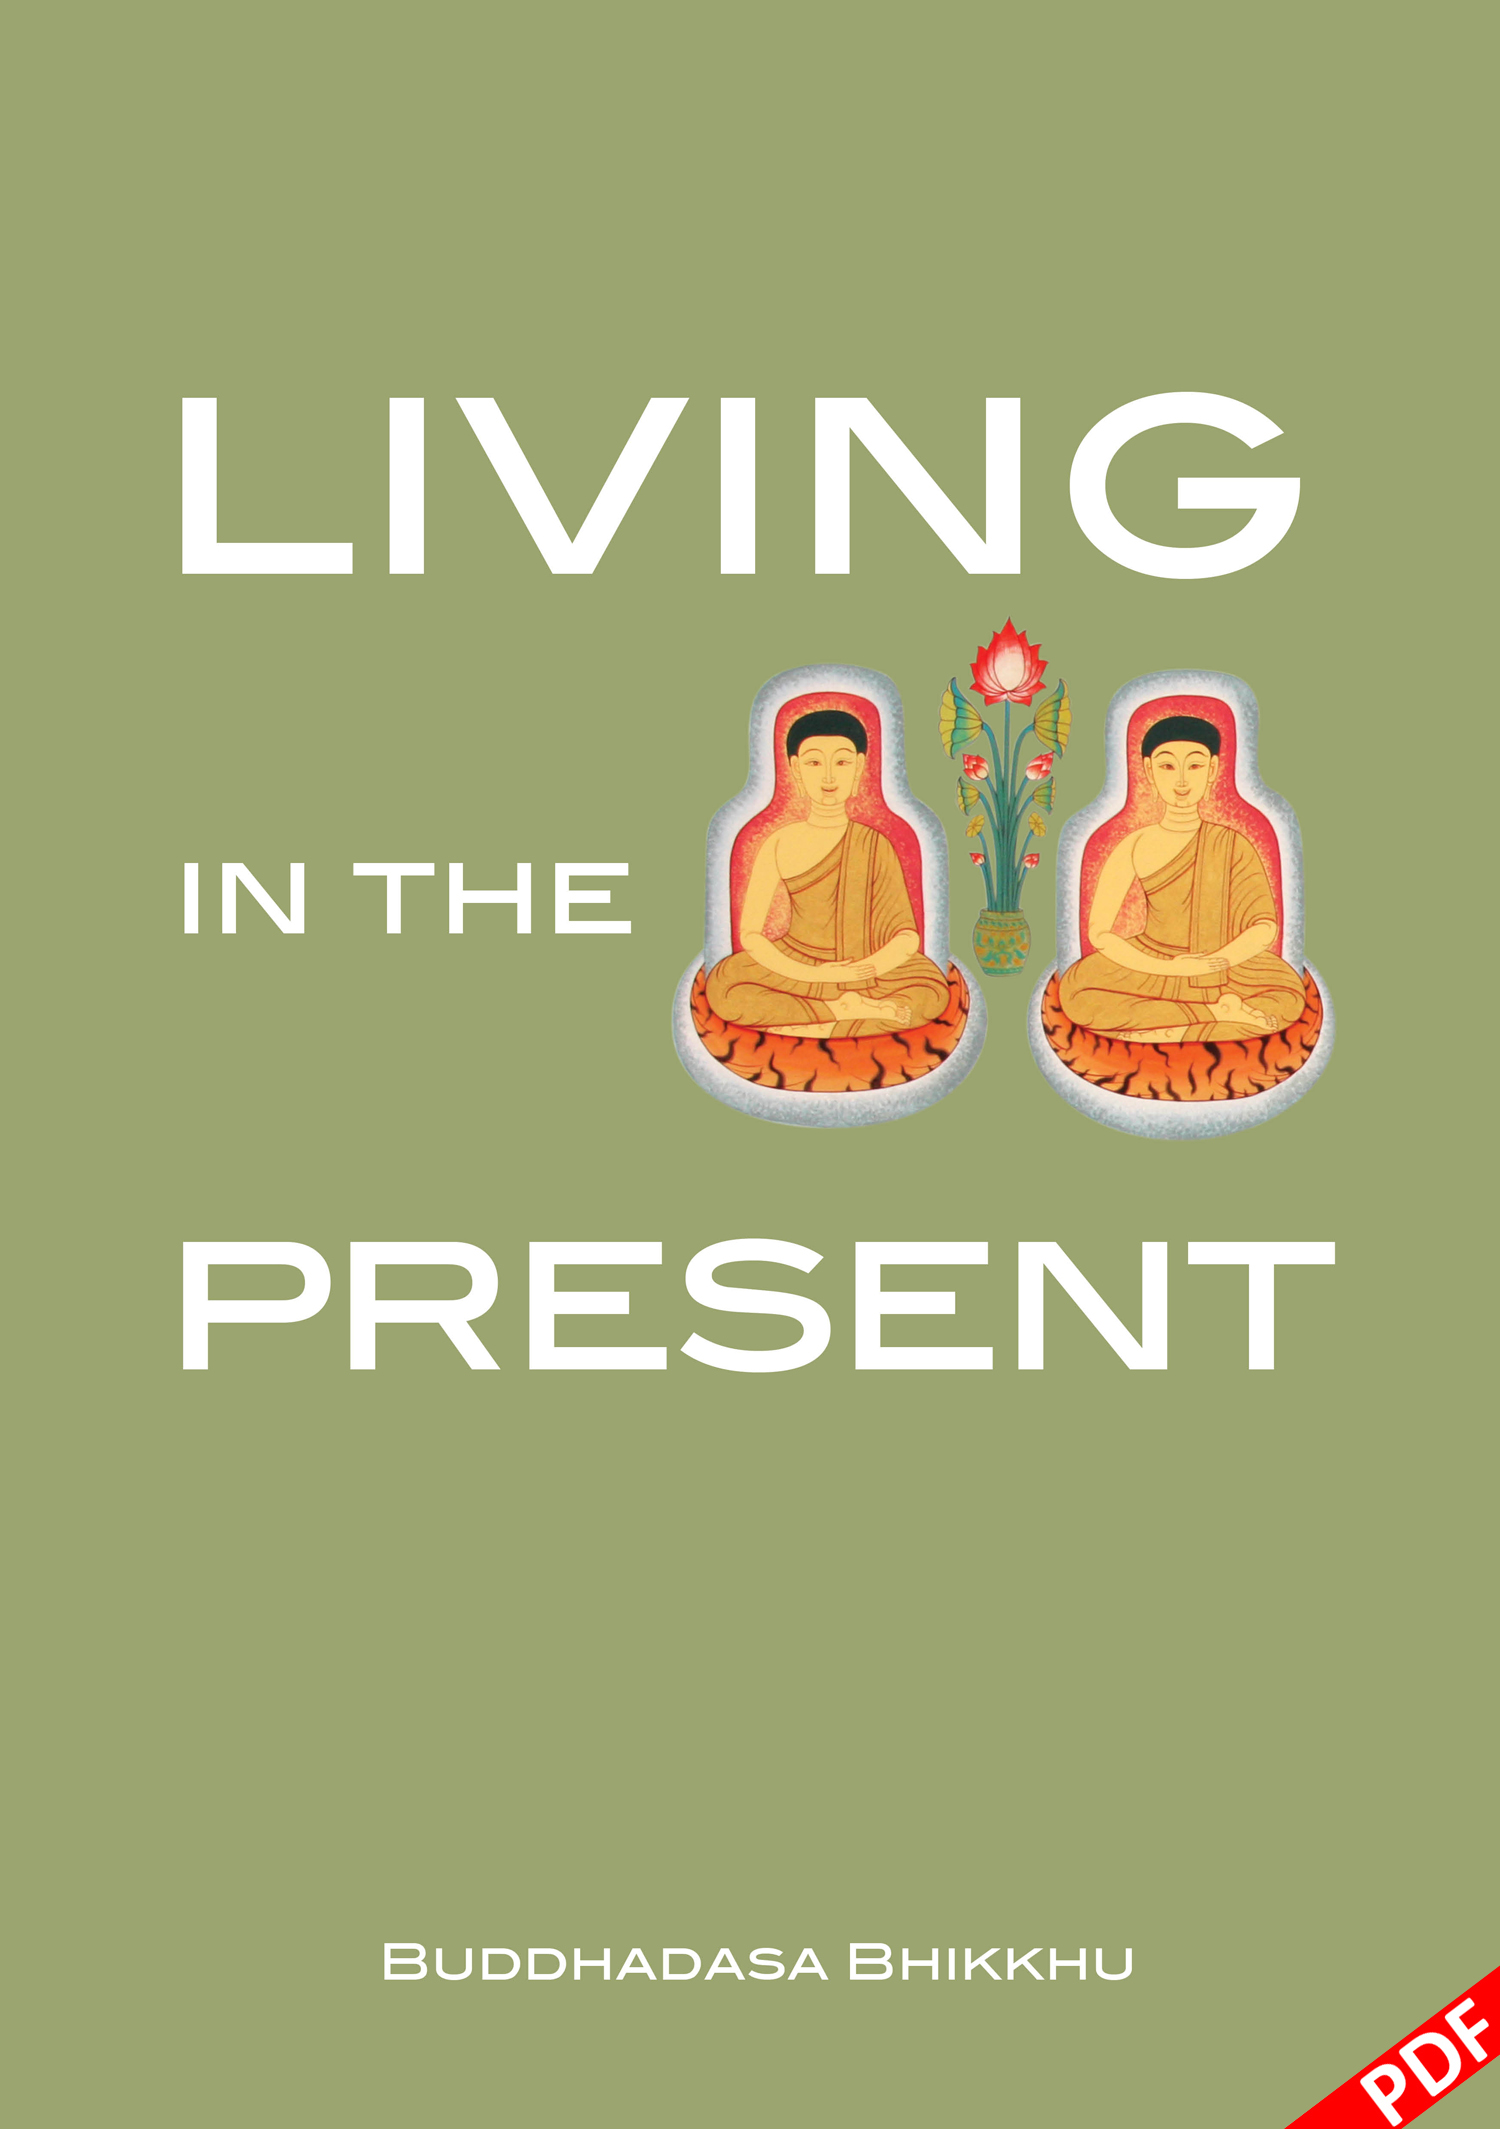 Living in the present pdf